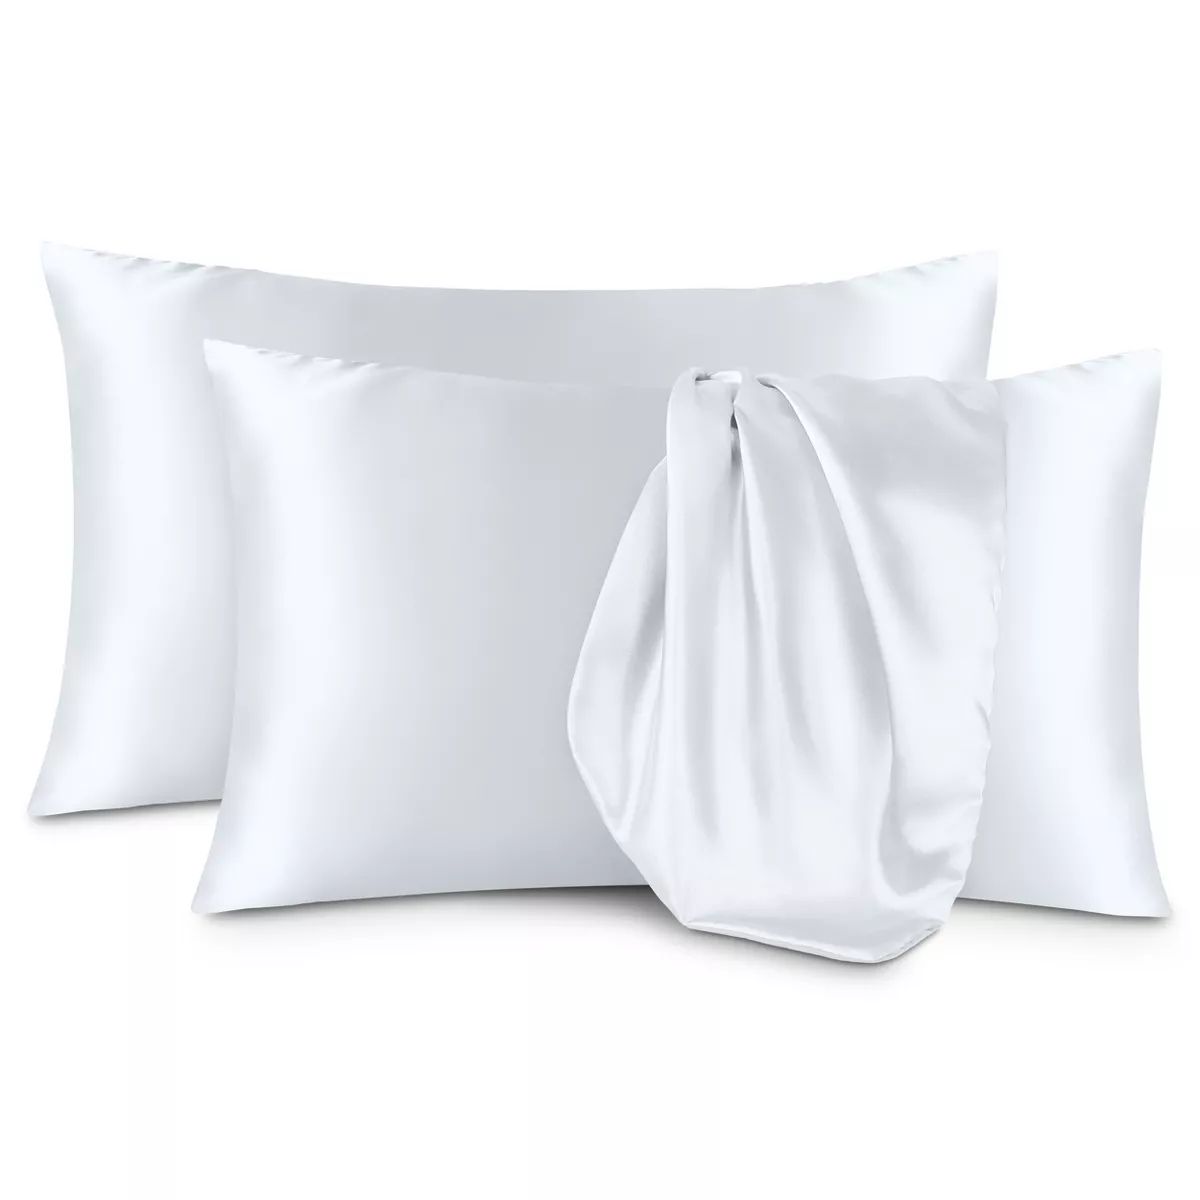 2 Pcs Satin Pillowcase Set for Hair and Skin by Bare Home | Target